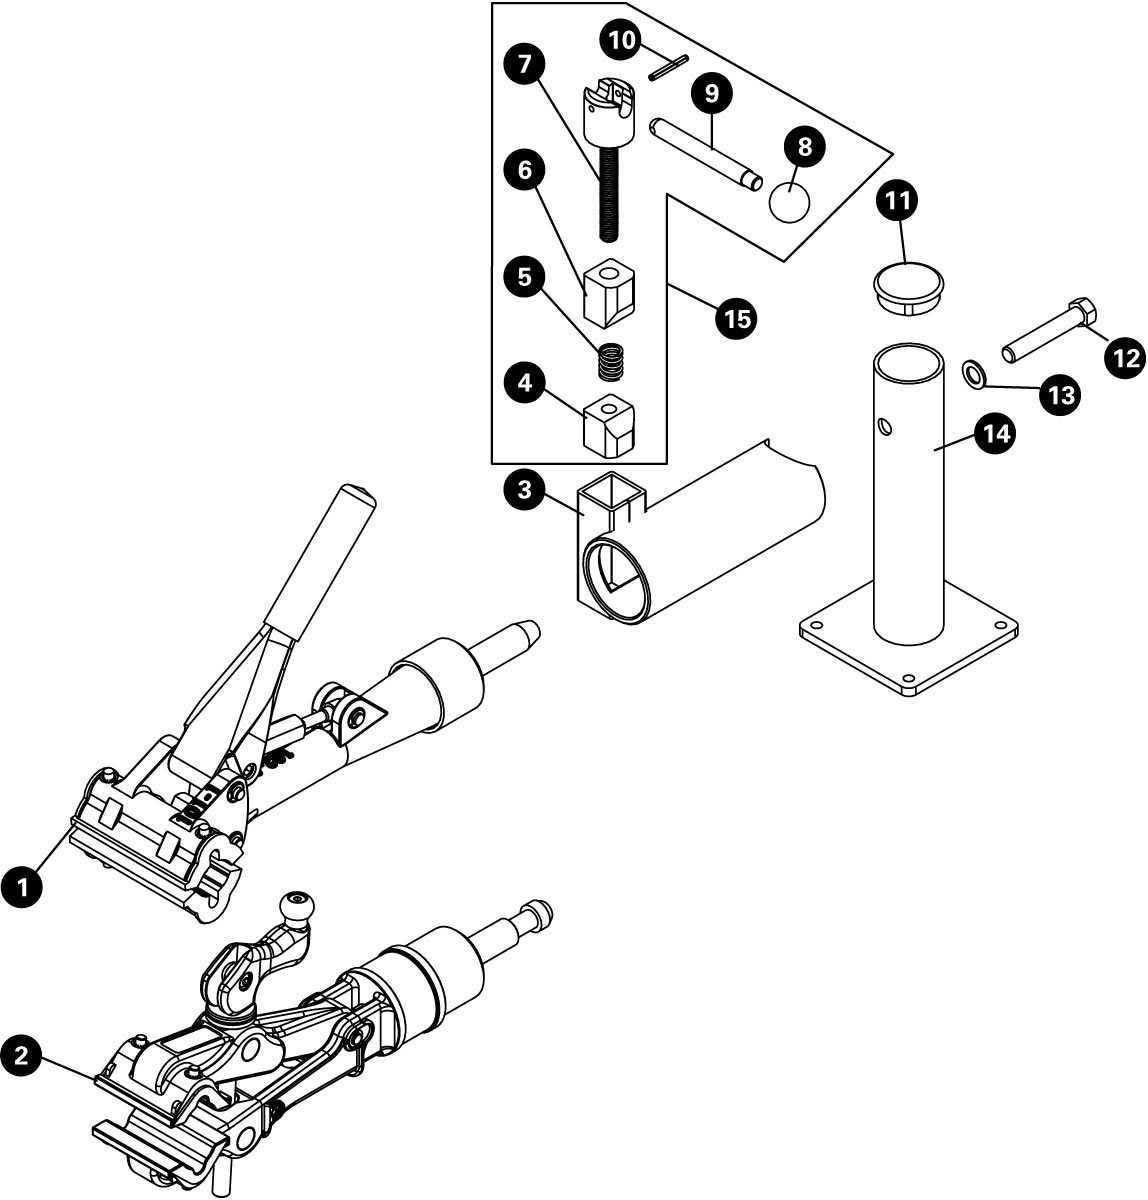 Parts diagram for PRS-4 OS-1 Deluxe Bench Mount Repair Stand, enlarged